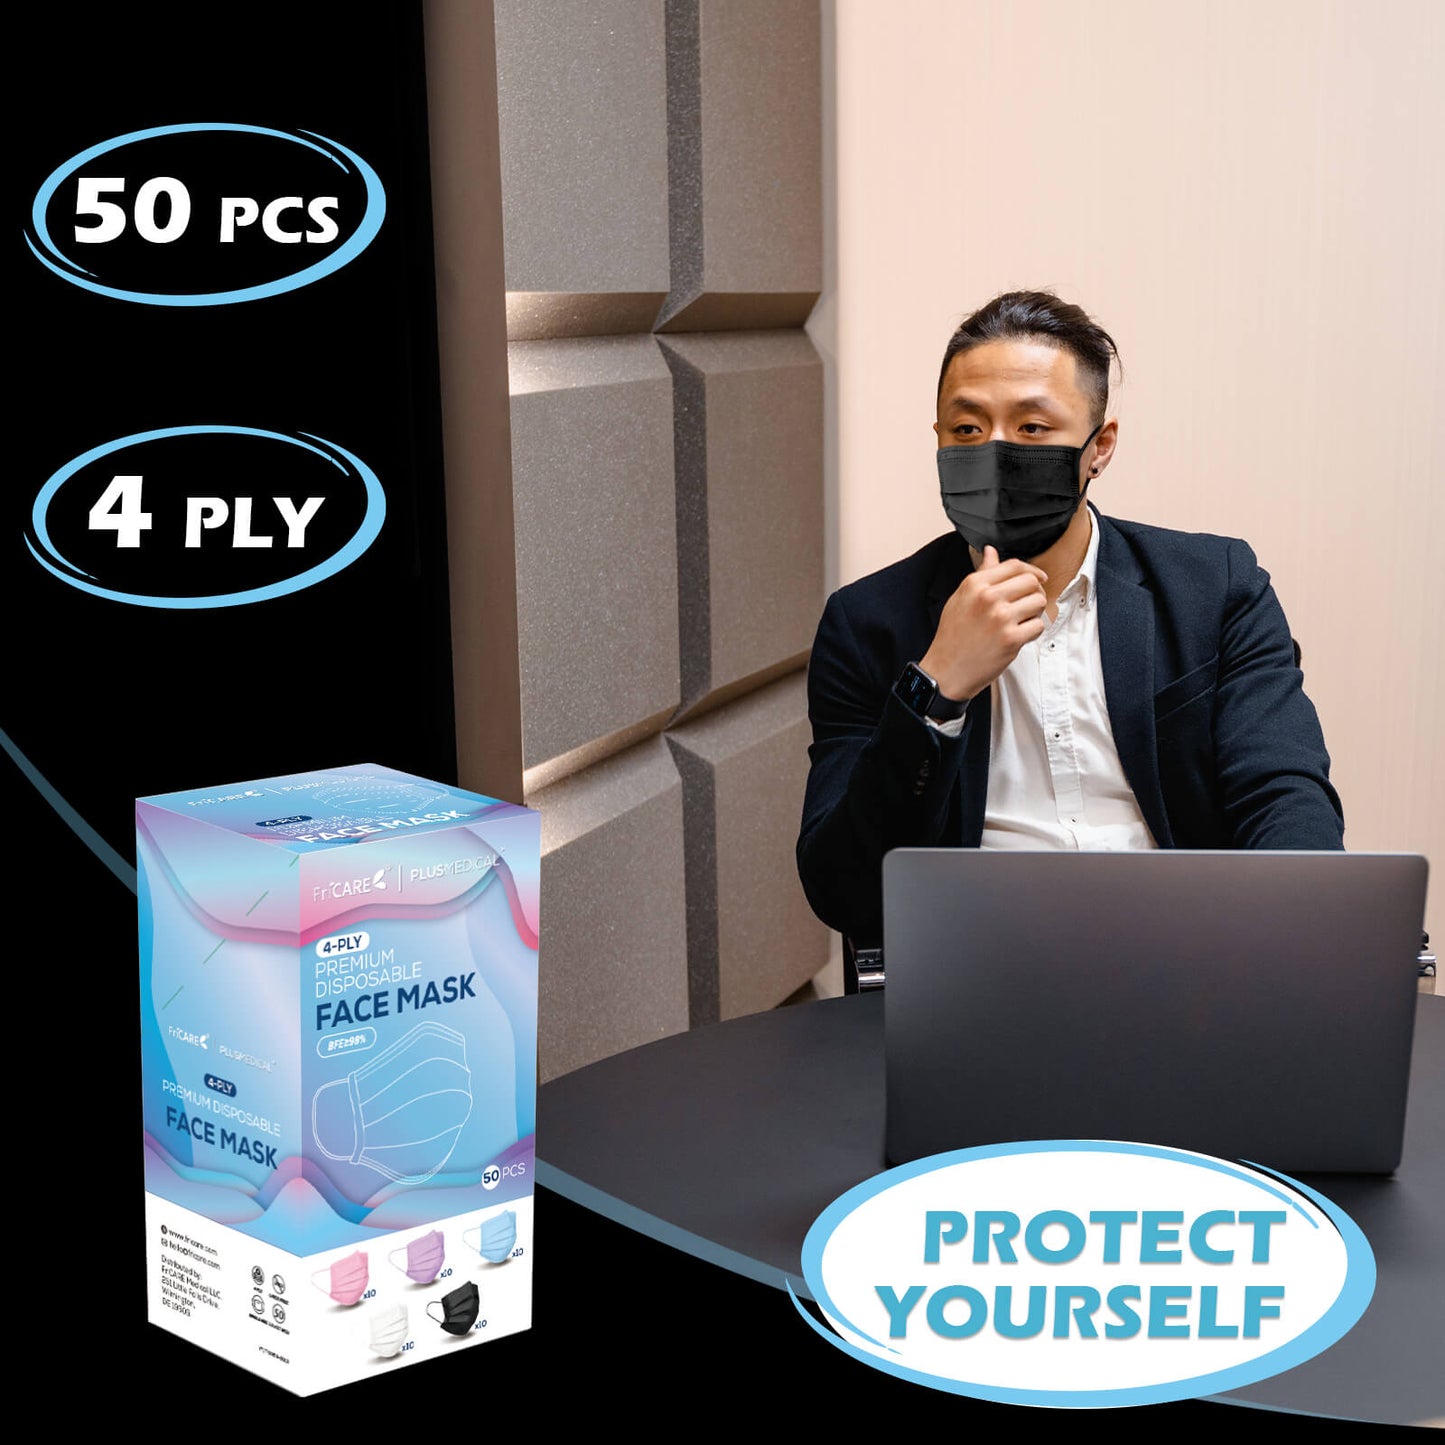 FriCARE Disposable Face Masks 4 Ply 50PCS Individually Wrapped, Breathable Mask for Adults Women Man